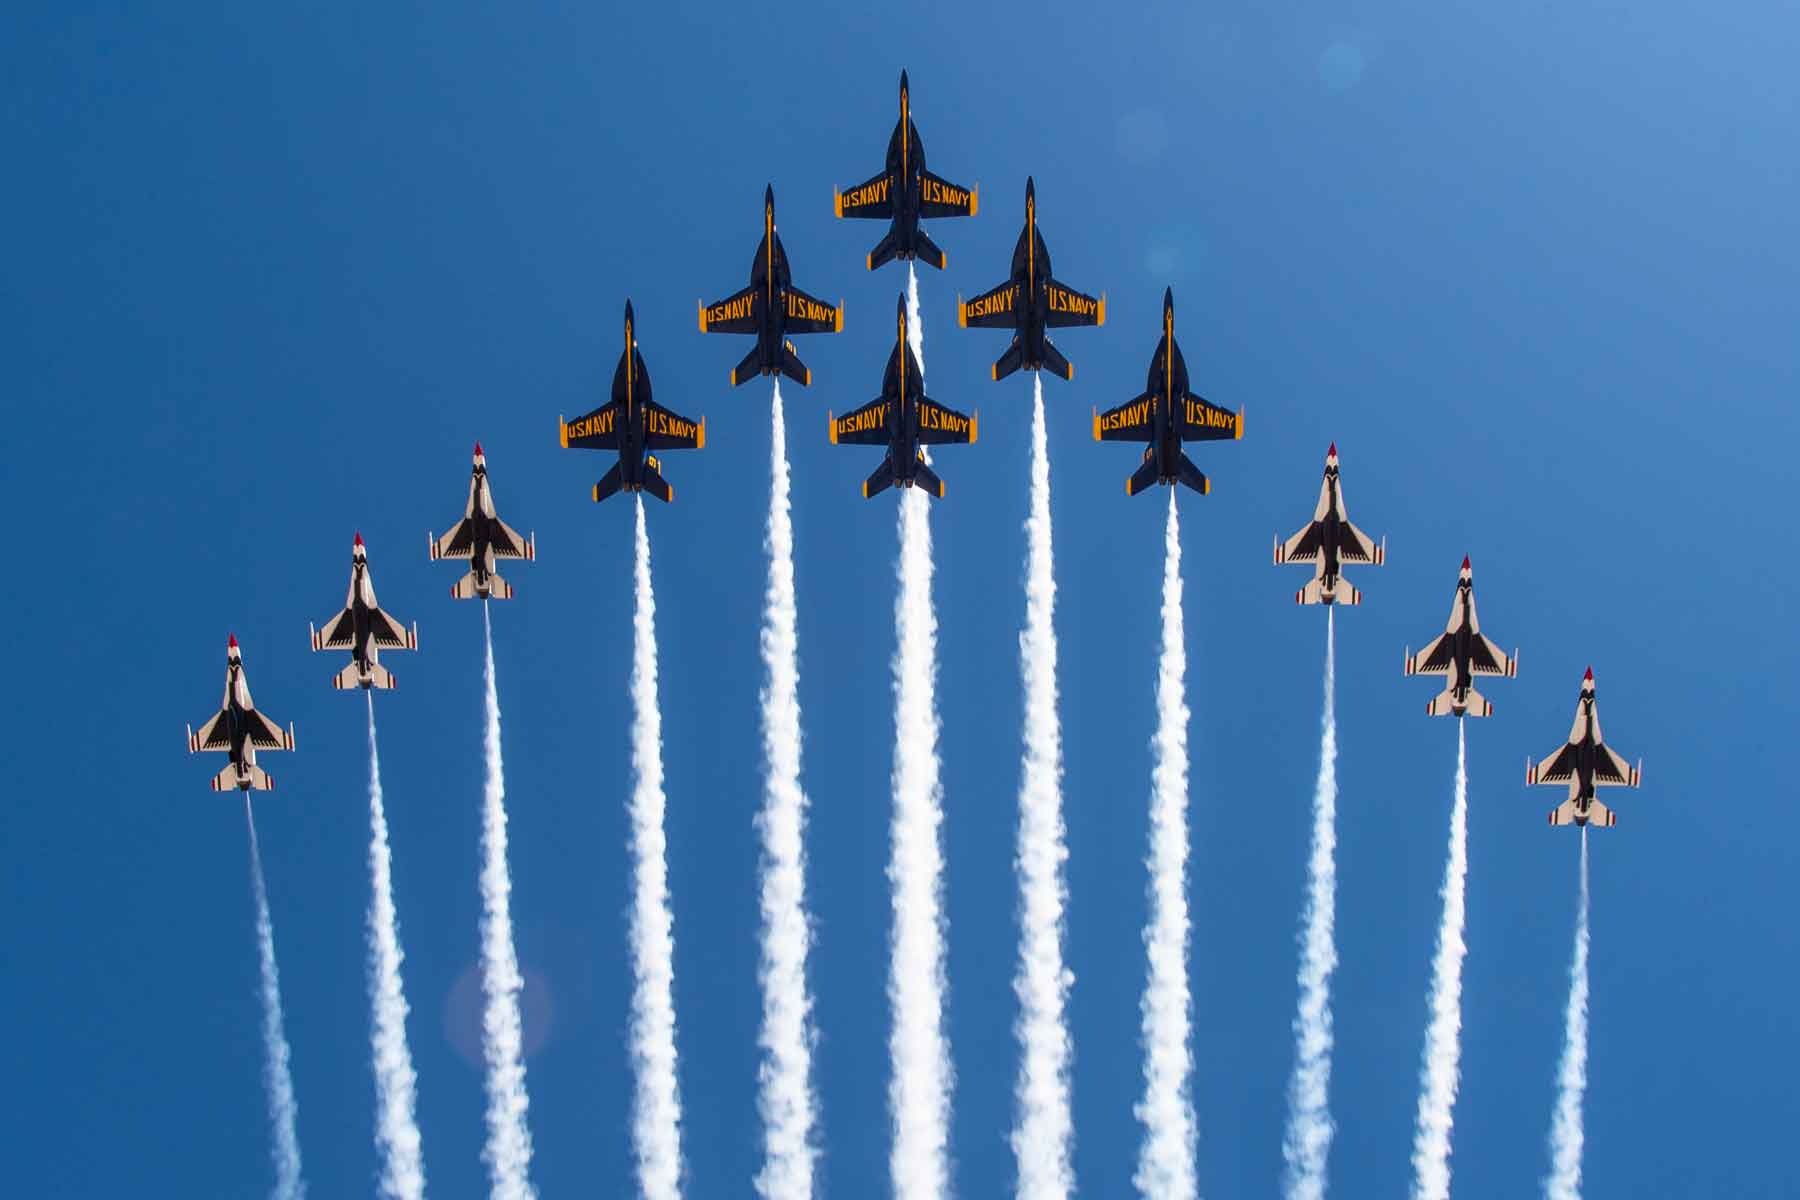 Blue Angels, Thunderbirds Team Up to Execute New 'Super Delta' Flying